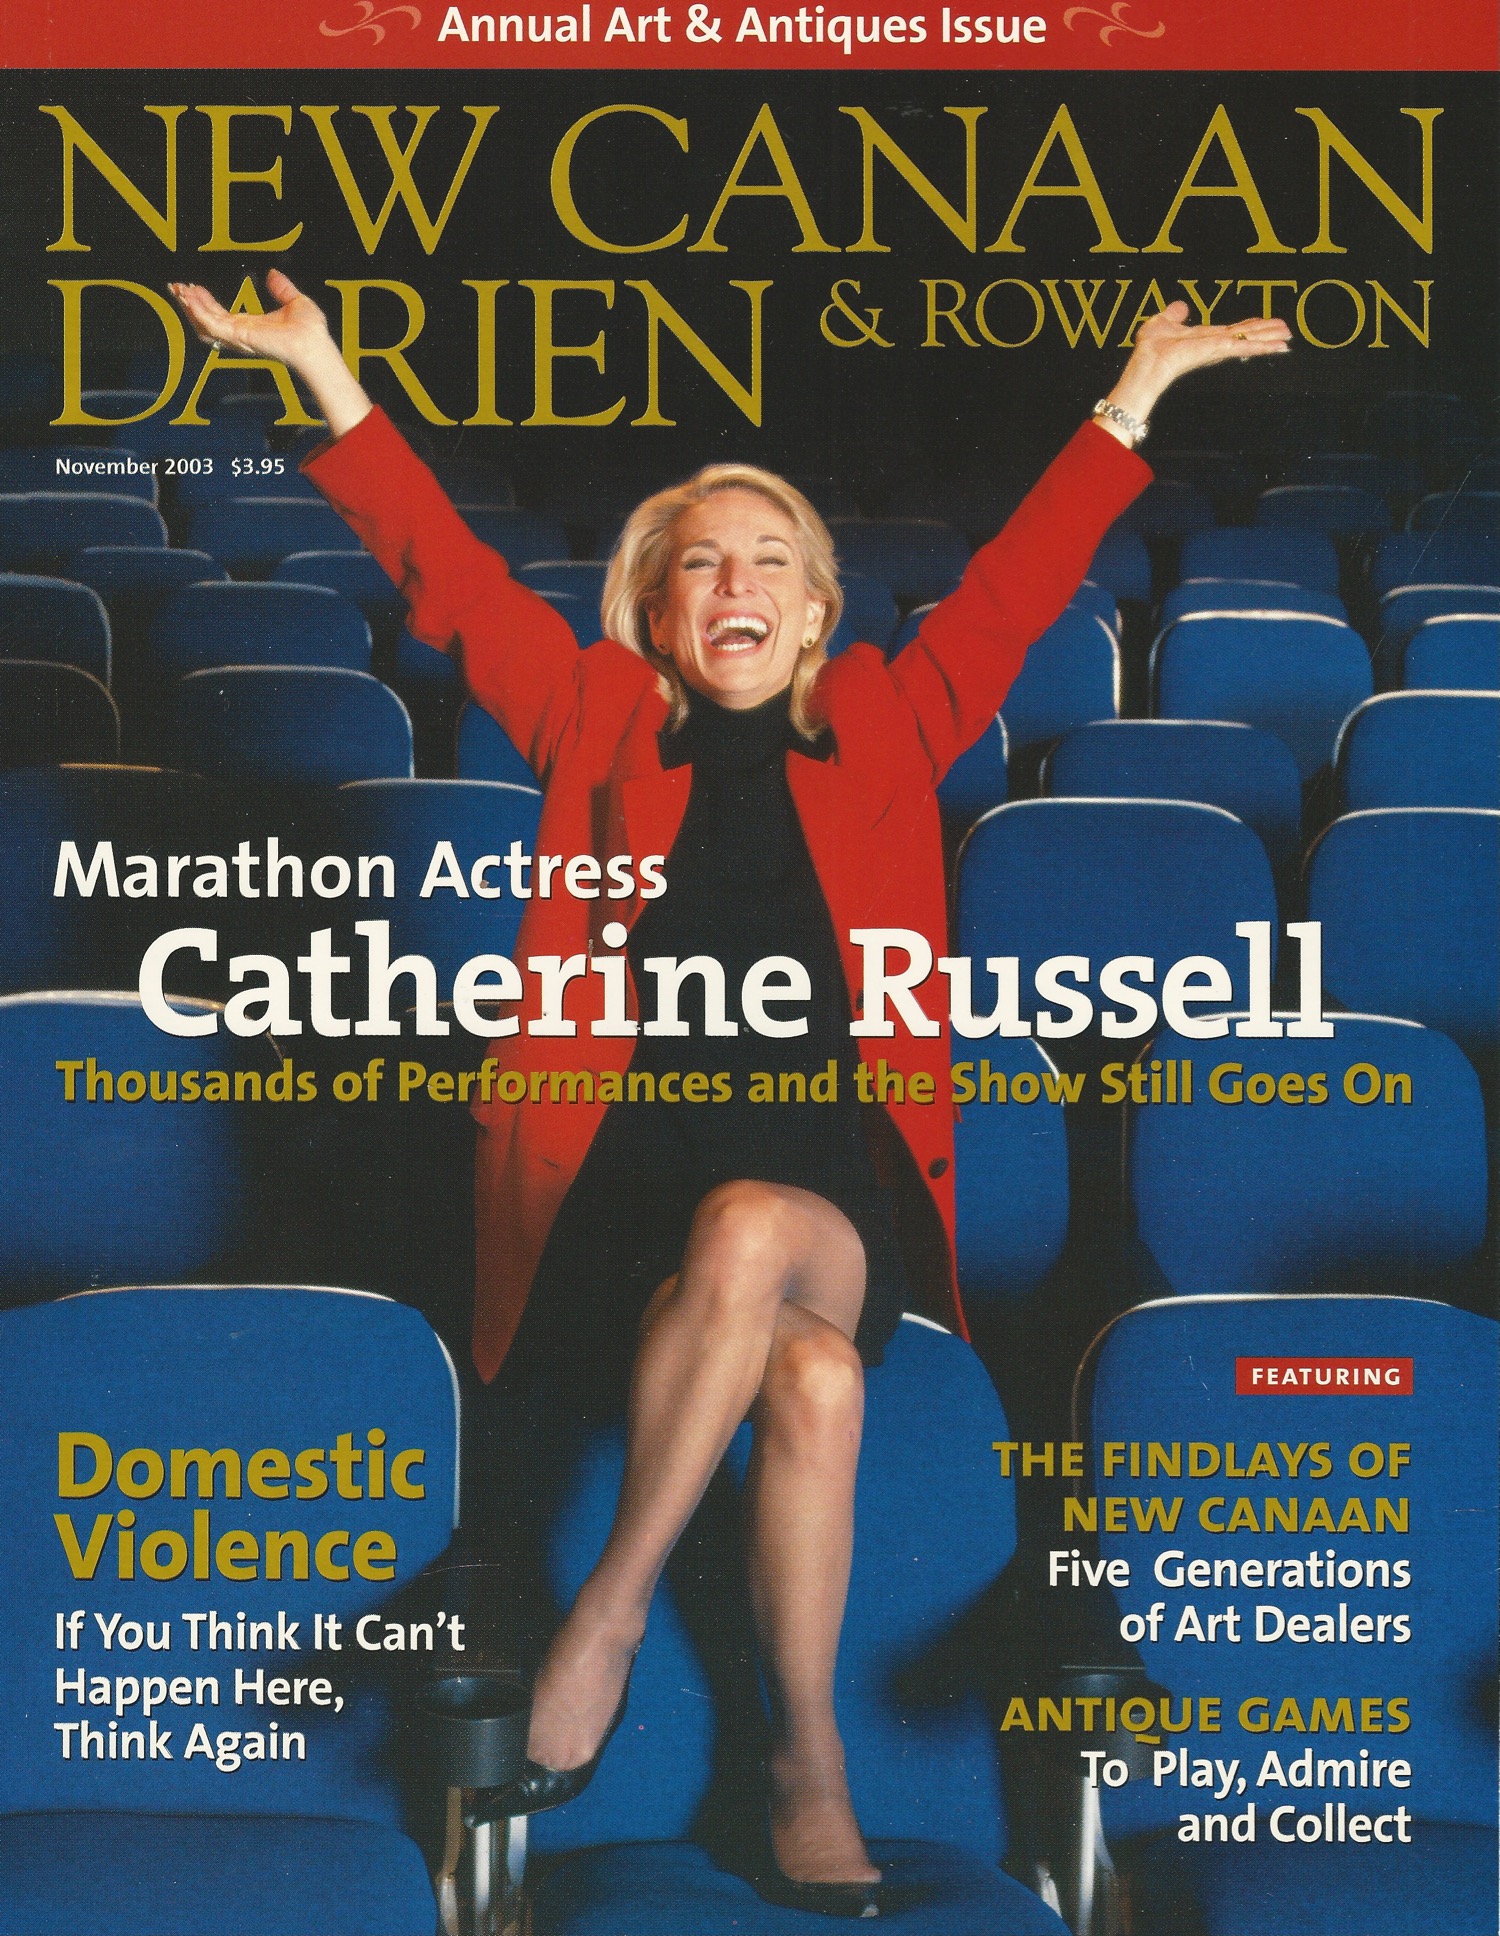 NCDR cover.jpg